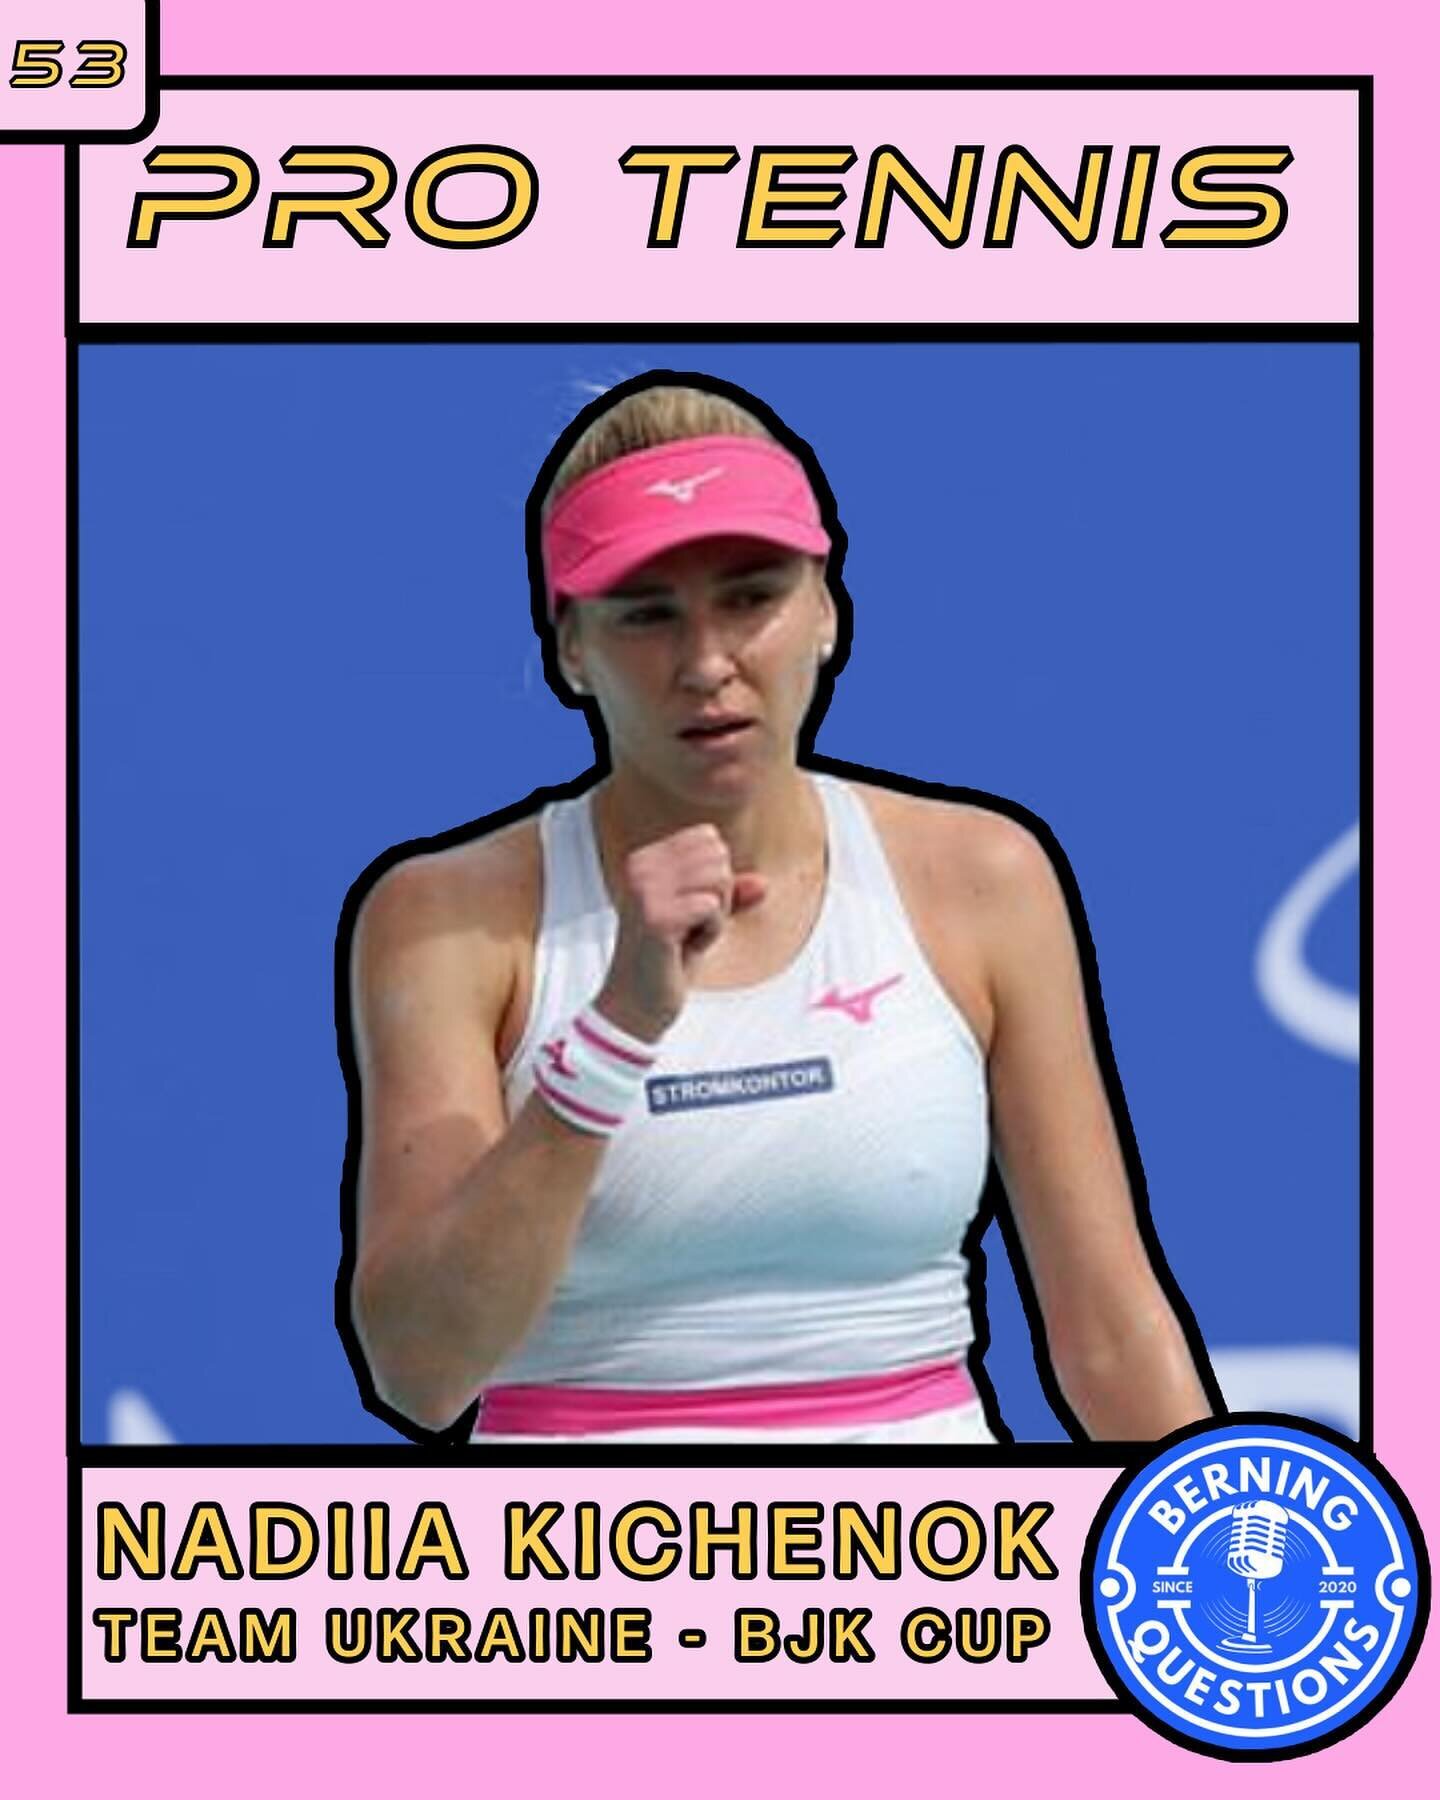 Meet Nadiia Kichenok🤝🏻

@nadiakichenok is a professional tennis player who was just announced on the Ukrainian BJK team! She also happens to be a supporter of Berning Questions, more specifically S2: E2 Quarter of a Century! 🇺🇦

We thought it was